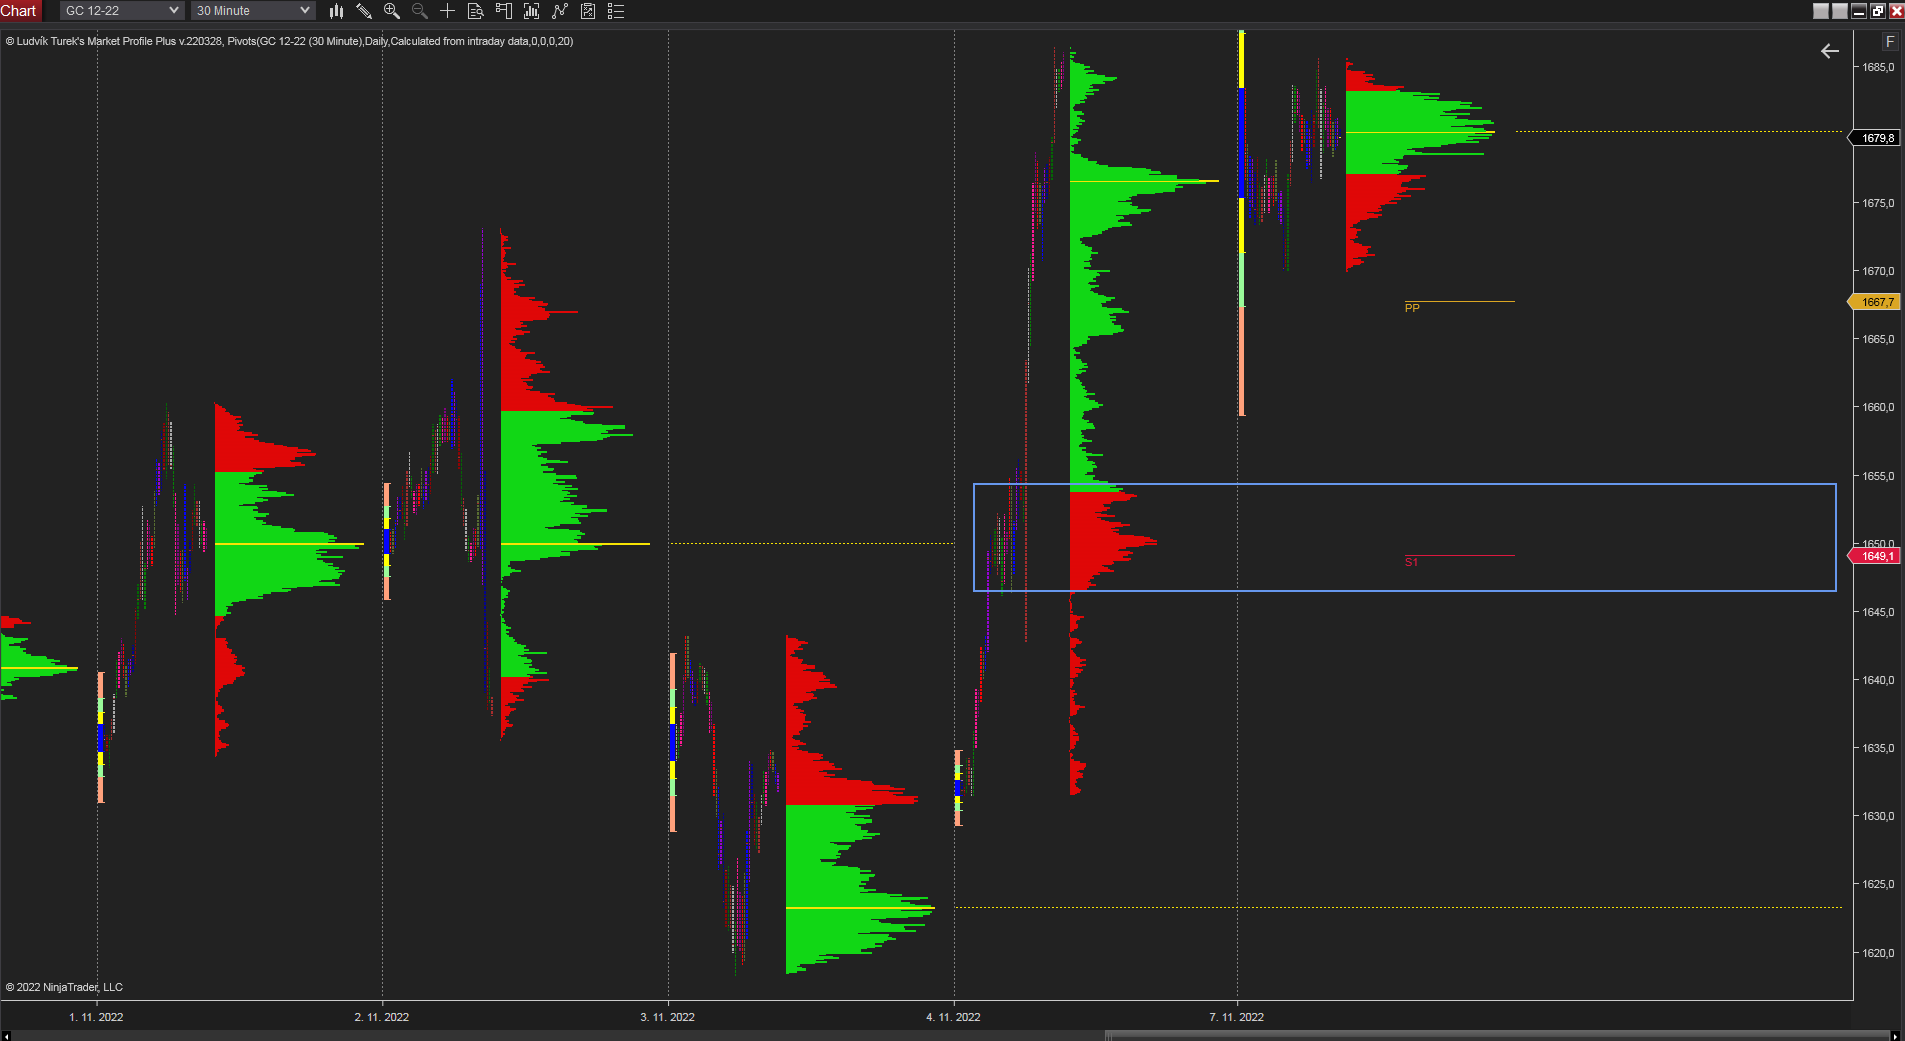 30 minutes chart of GC (Gold Futures). Daily market profile. Source: Author's analysis